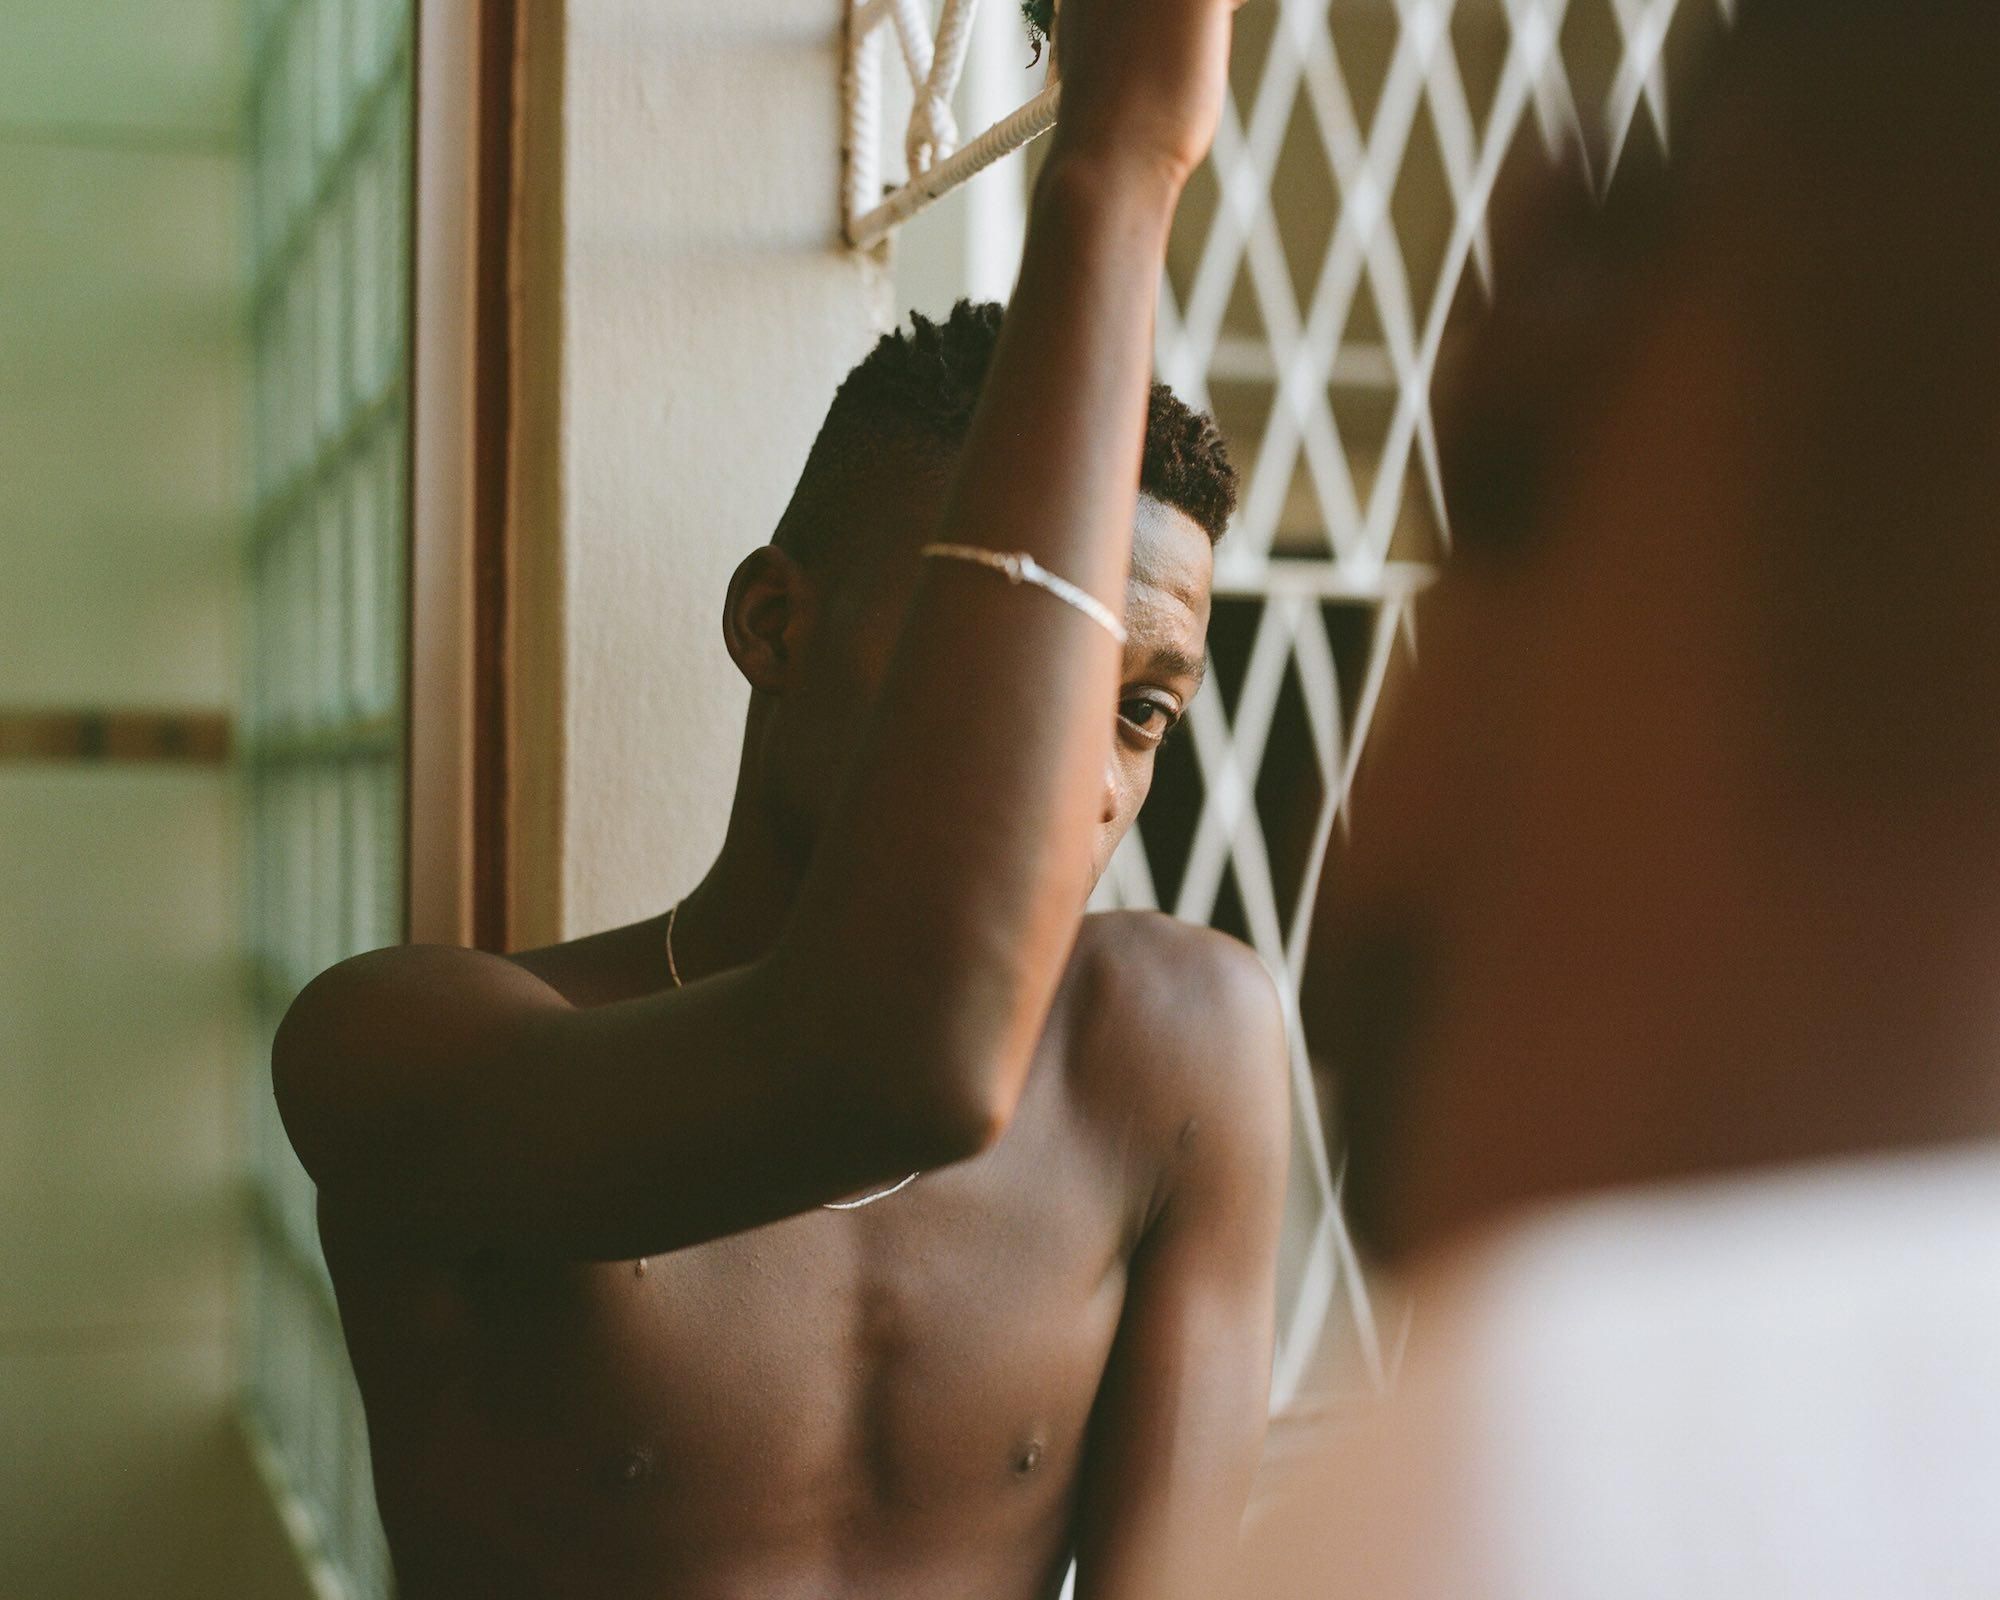 Mozambique's LGBTQ Community Finds a Home in 'Hotel Luso'